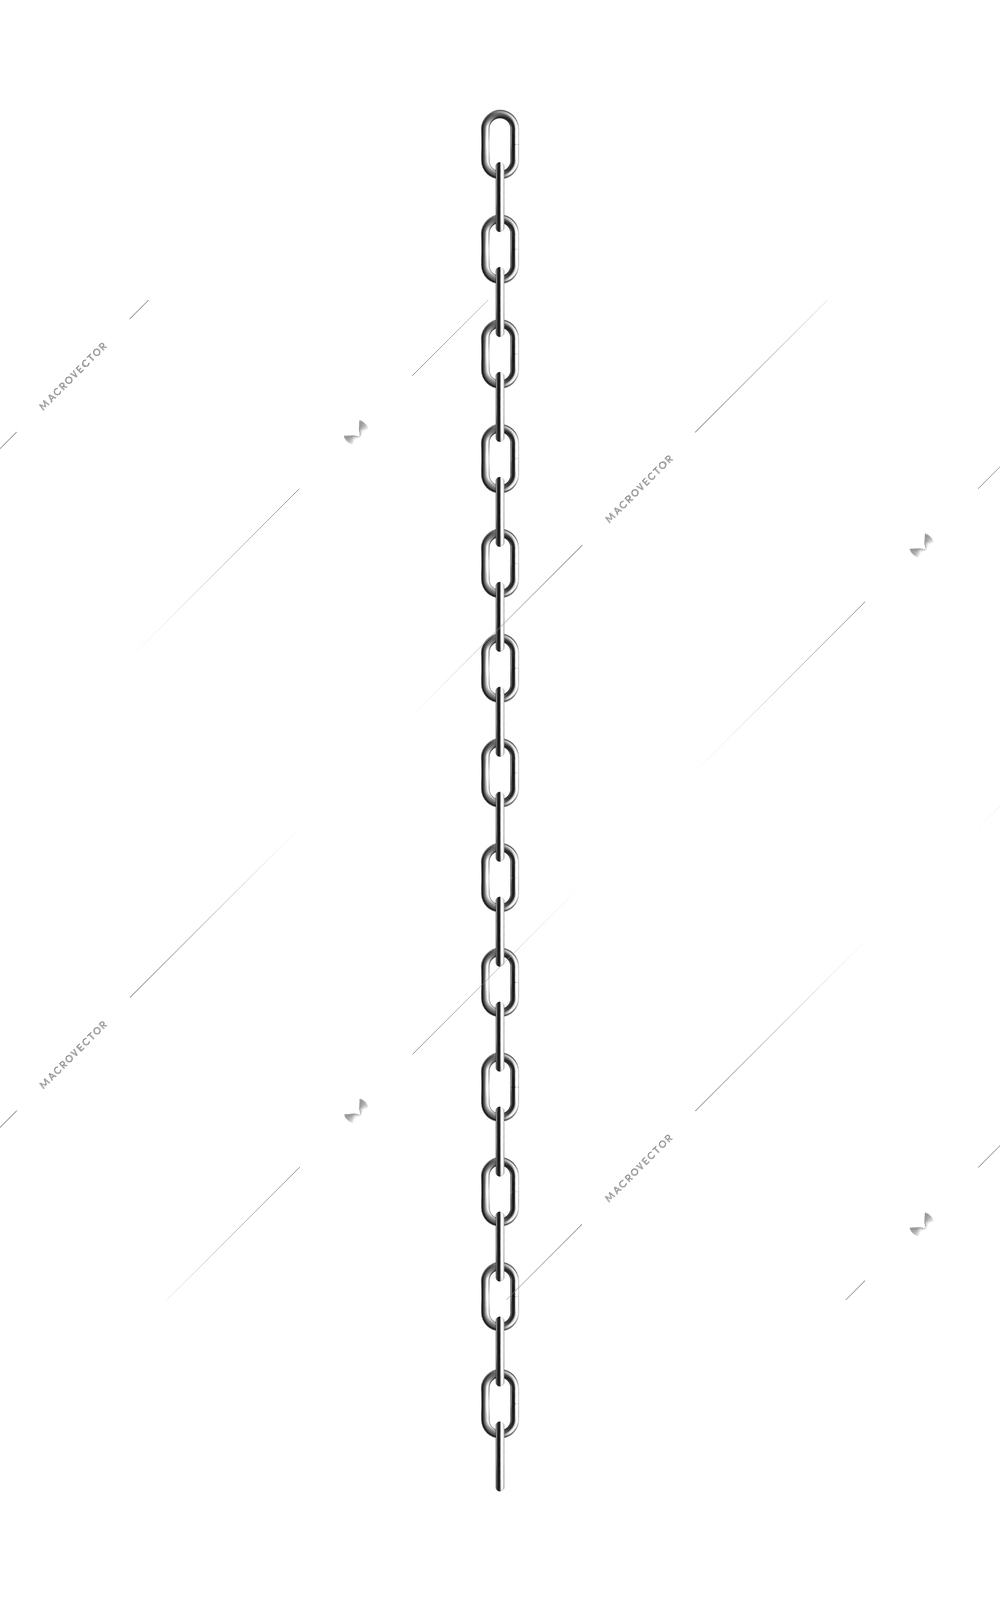 Metal rusty chain realistic composition with isolated images of straight hanging chain vector illustration